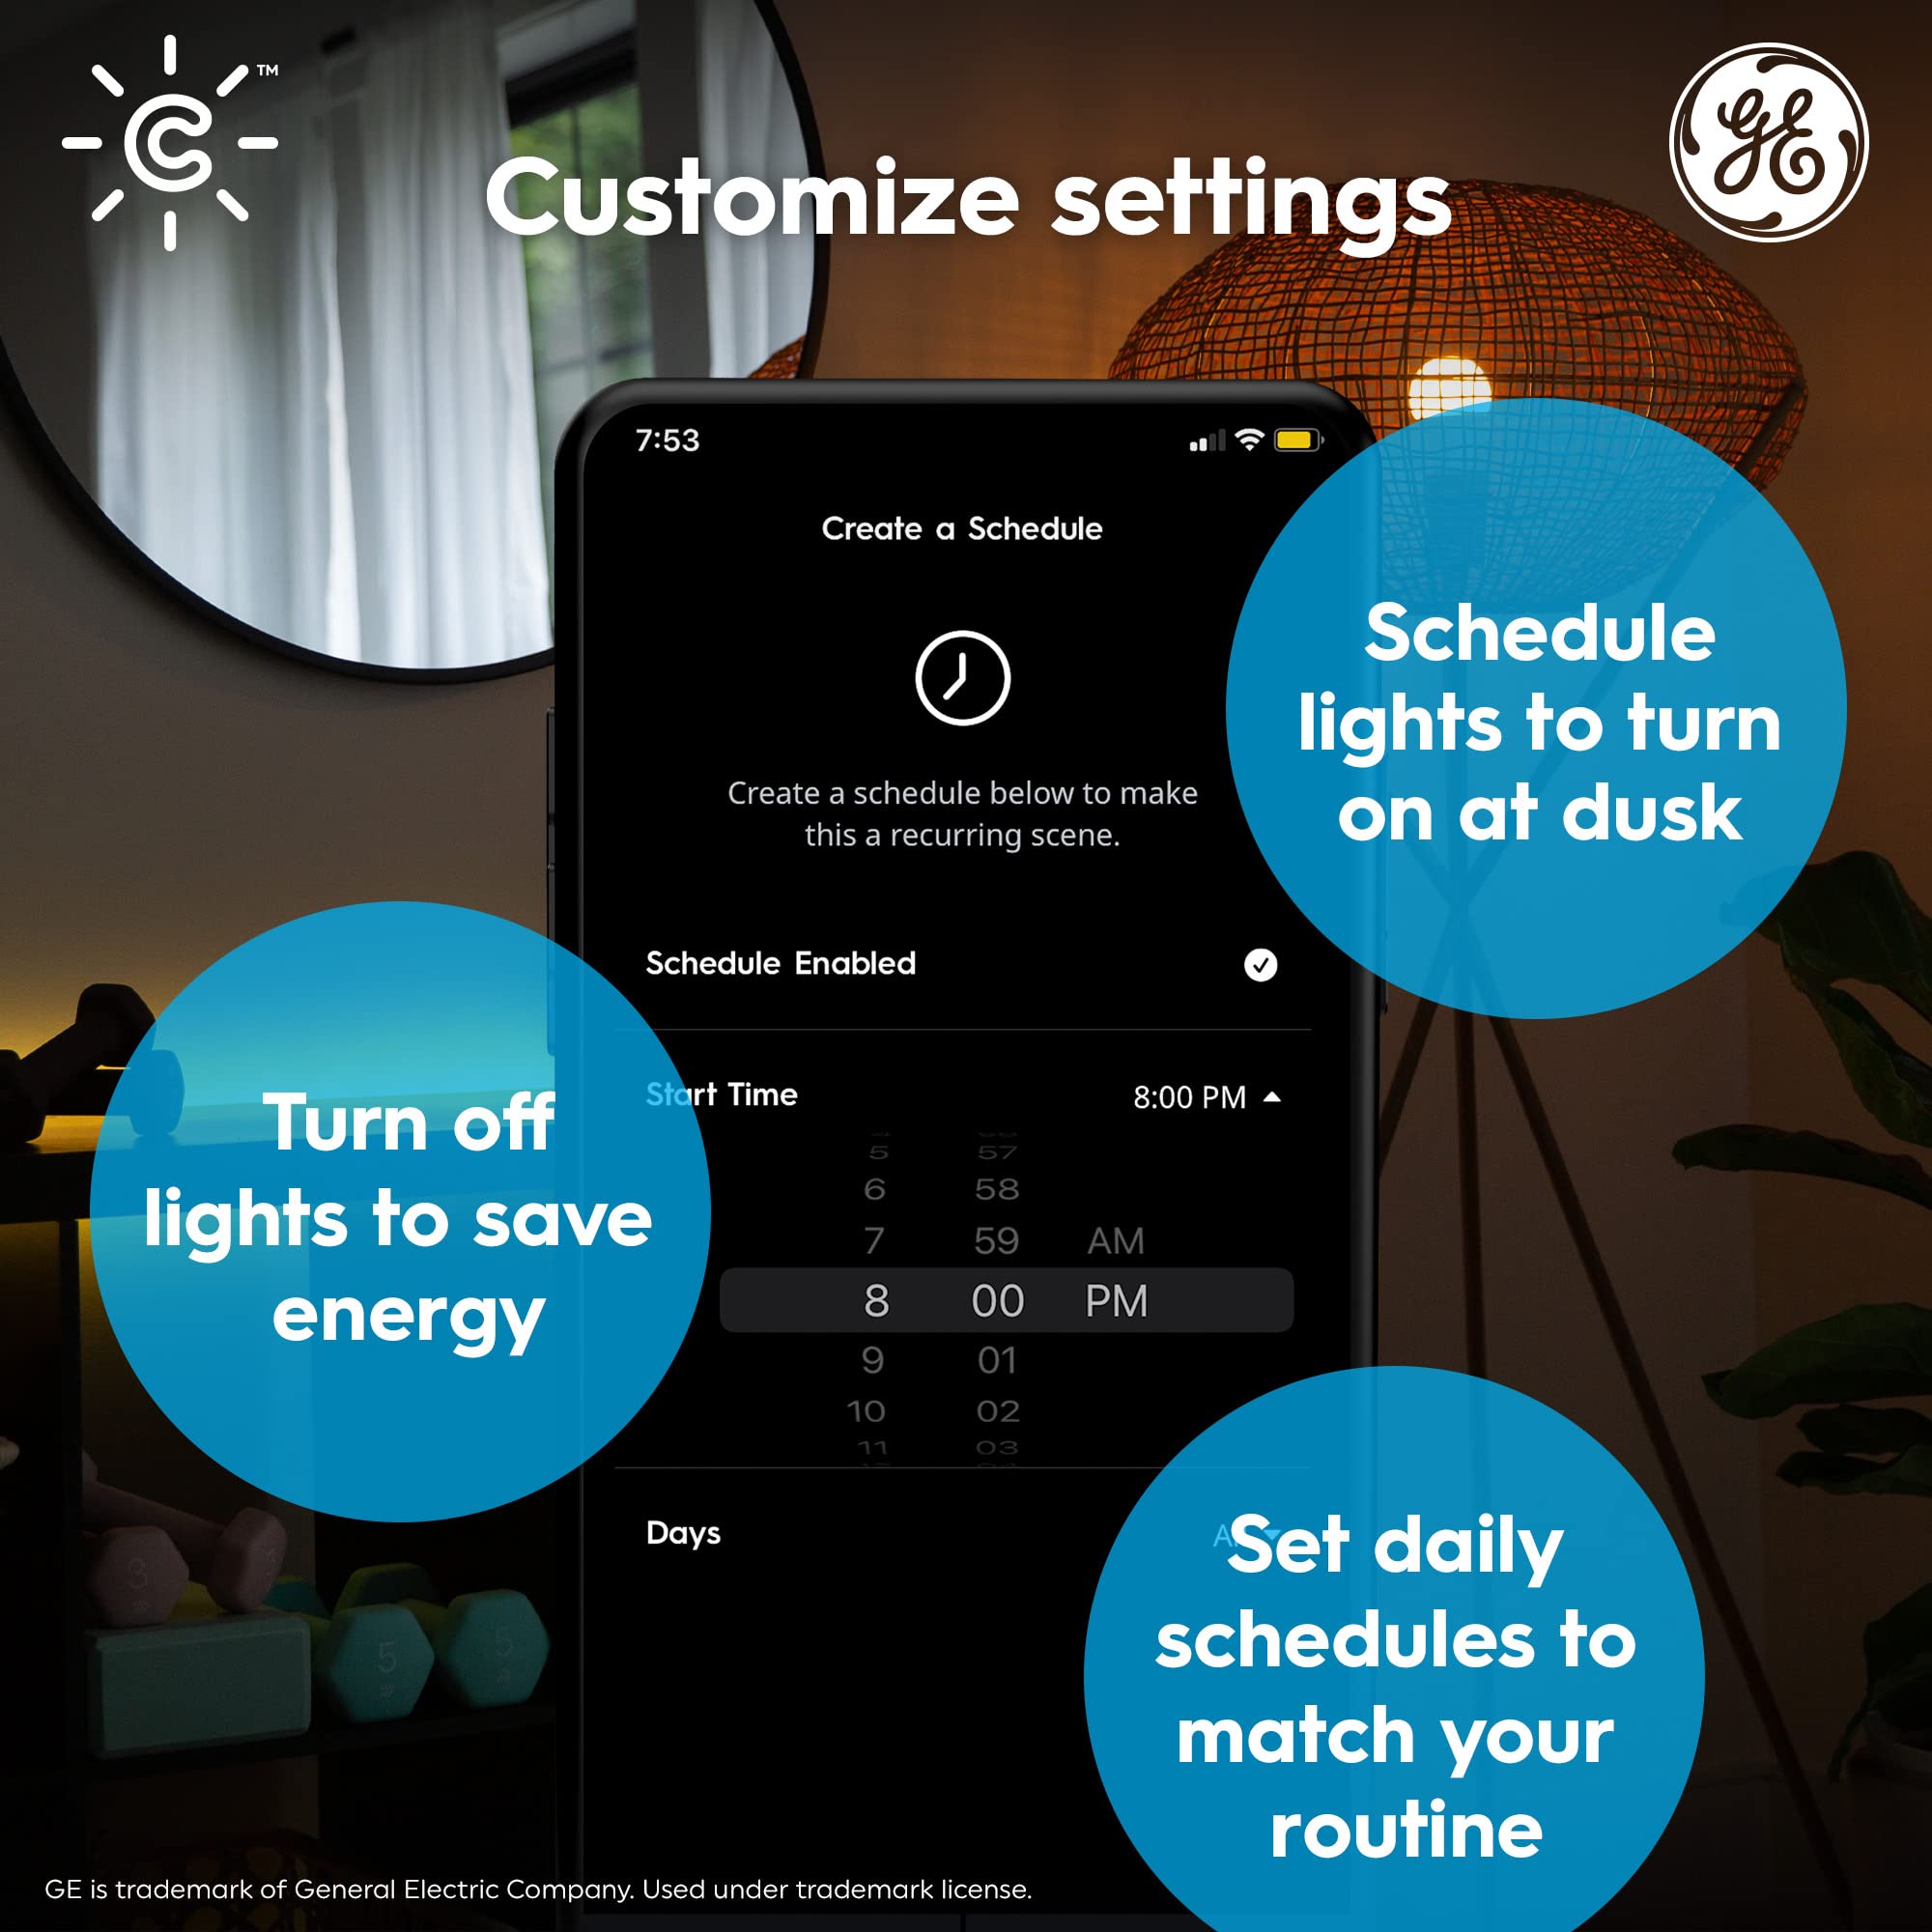 GE Lighting CYNC Smart LED Light Bulbs, Color Changing, Bluetooth and Wi-Fi, Works with Alexa and Google Home, ST19 Edison Style Light Bulbs (2 Pack)